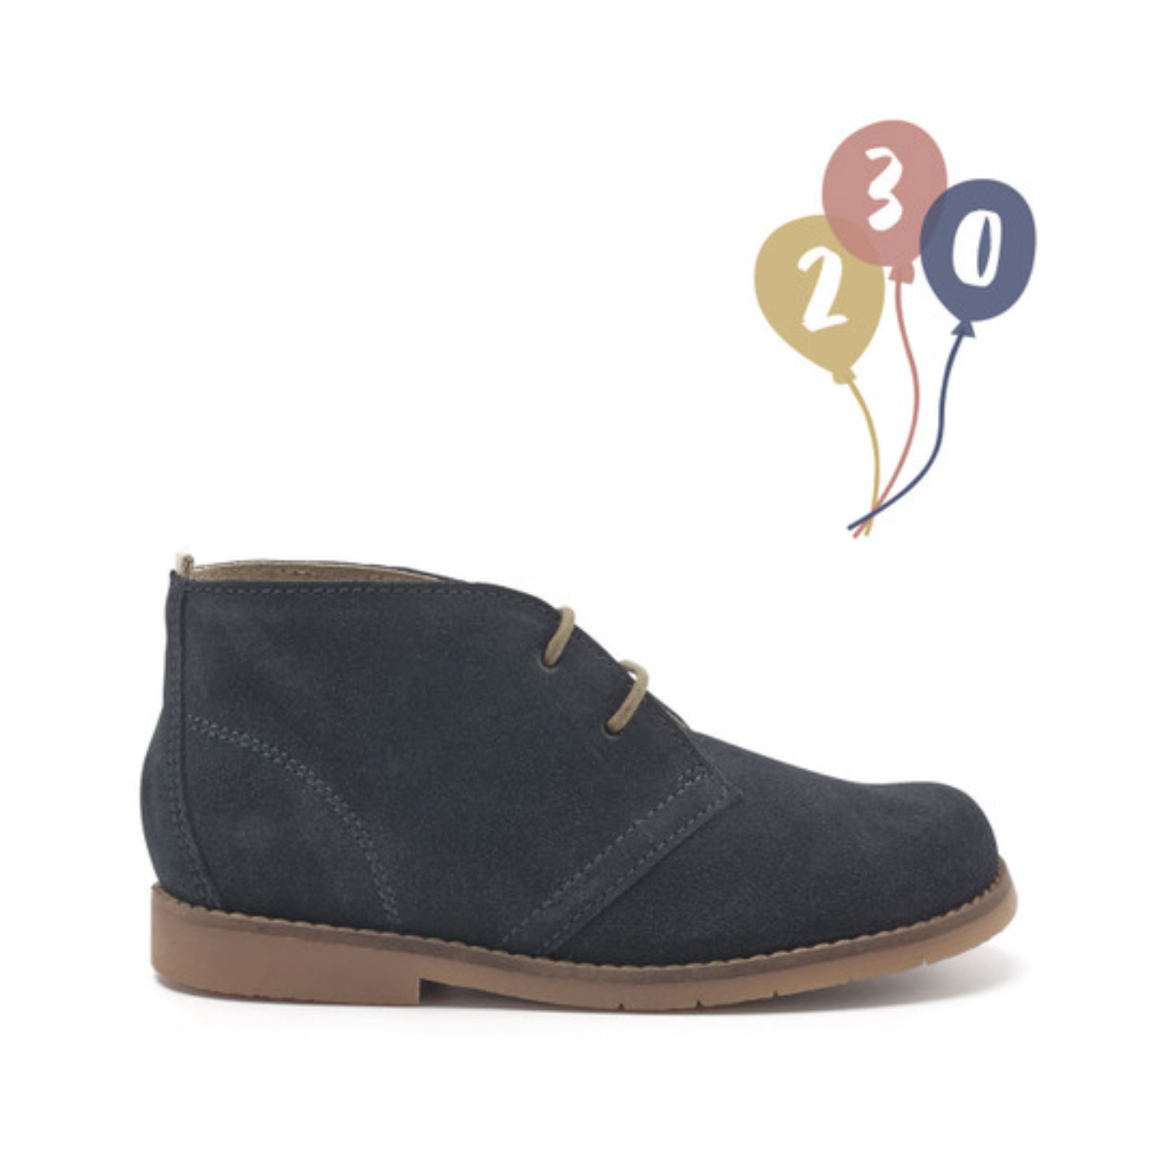 A Desert boot by Start-Rite, style Autumn, in navy suede with light brown laces and sole. Right side view.